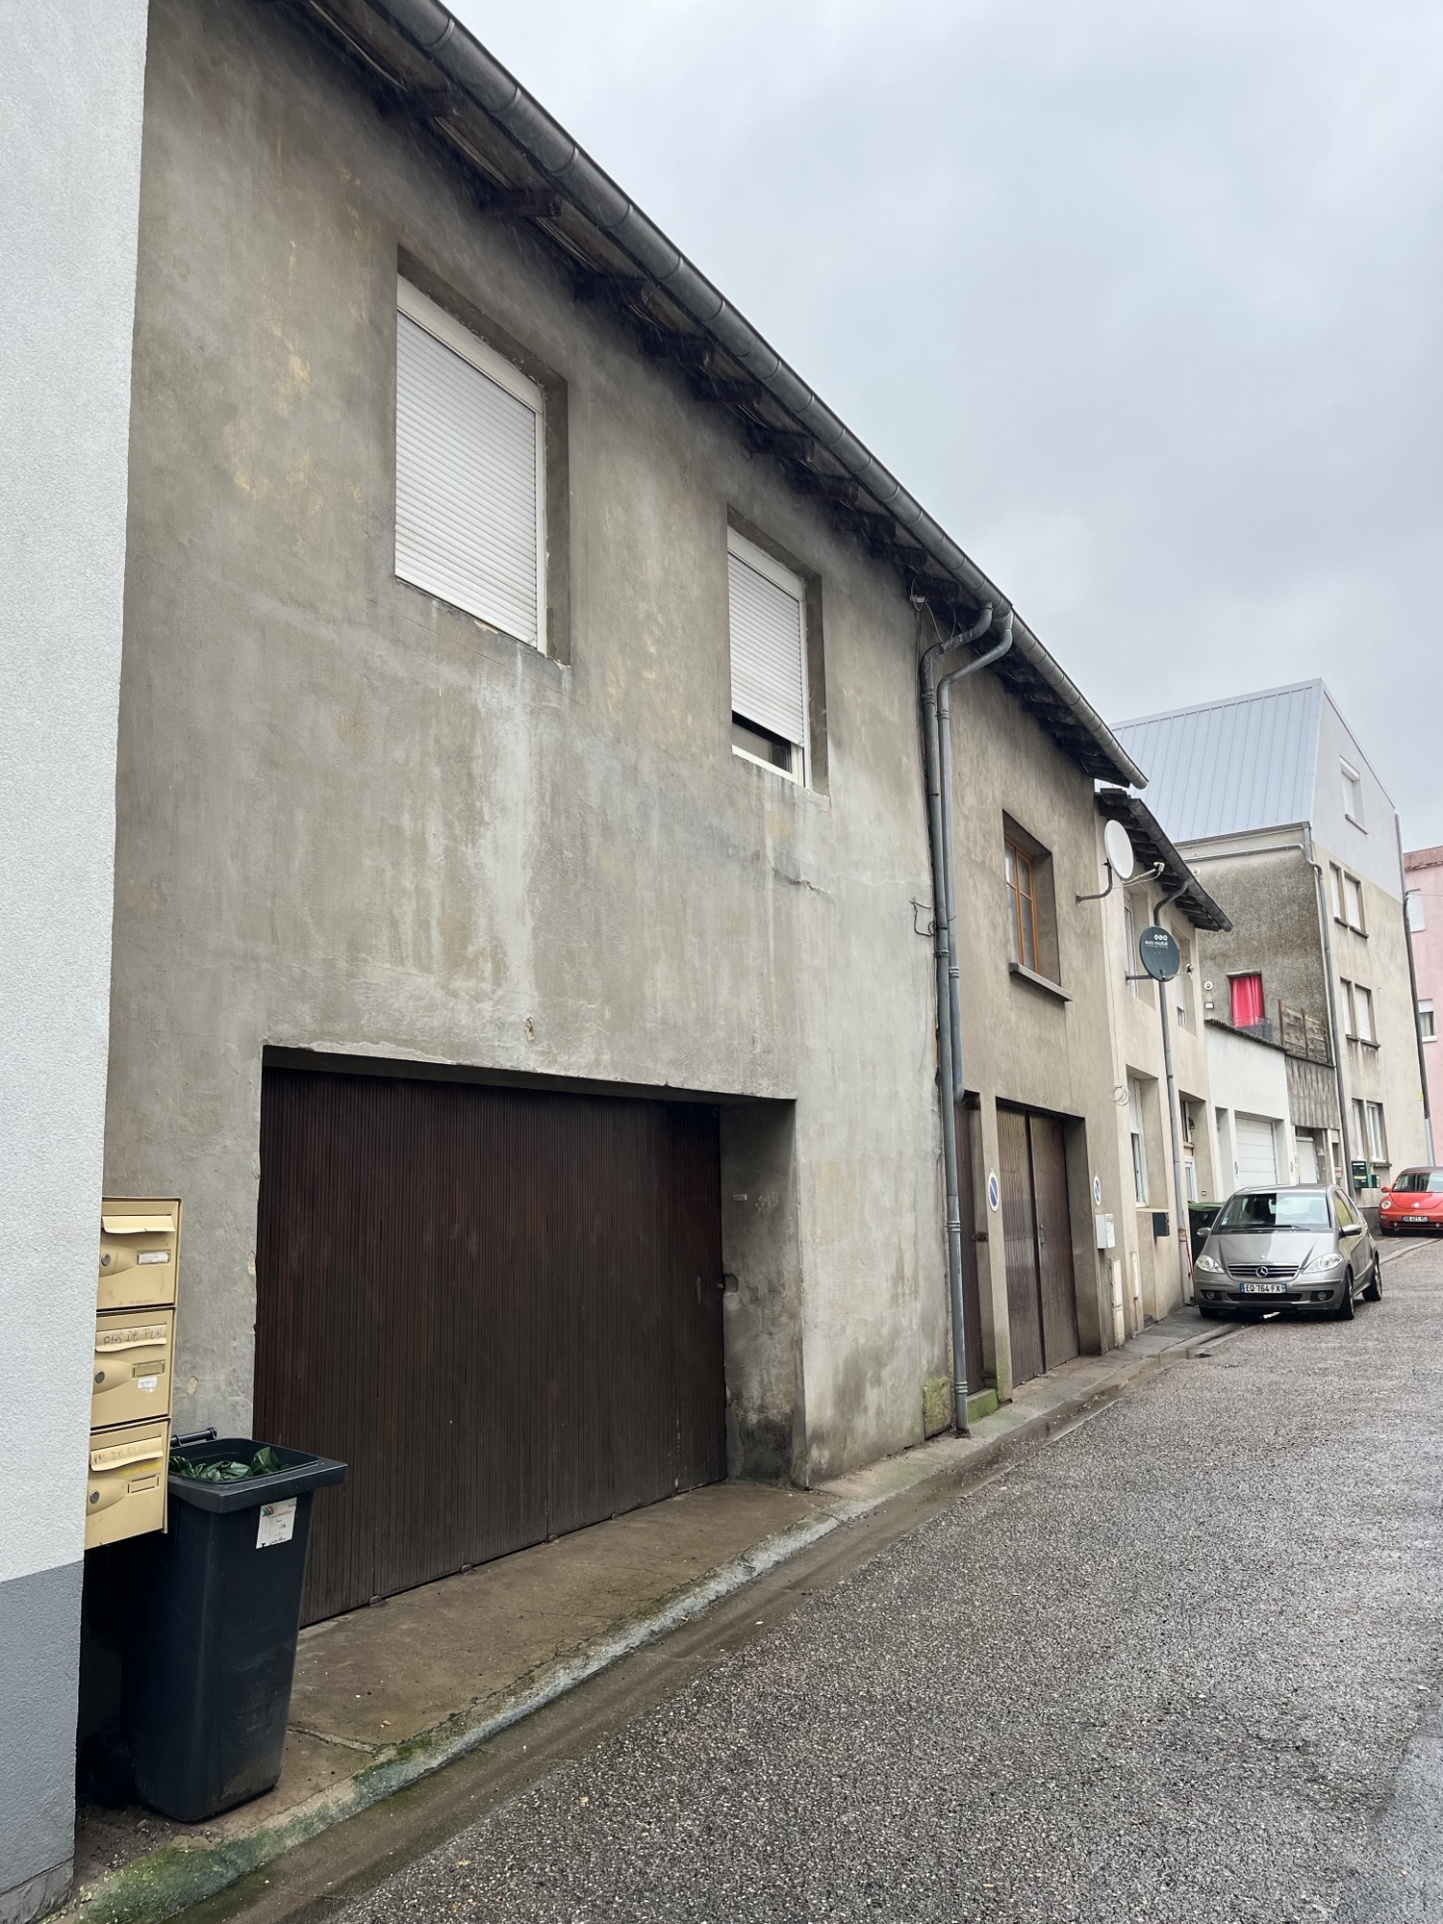 Vente Appartement 71m² 2 Pièces à Boulay-Moselle (57220) - Snis Imogroup